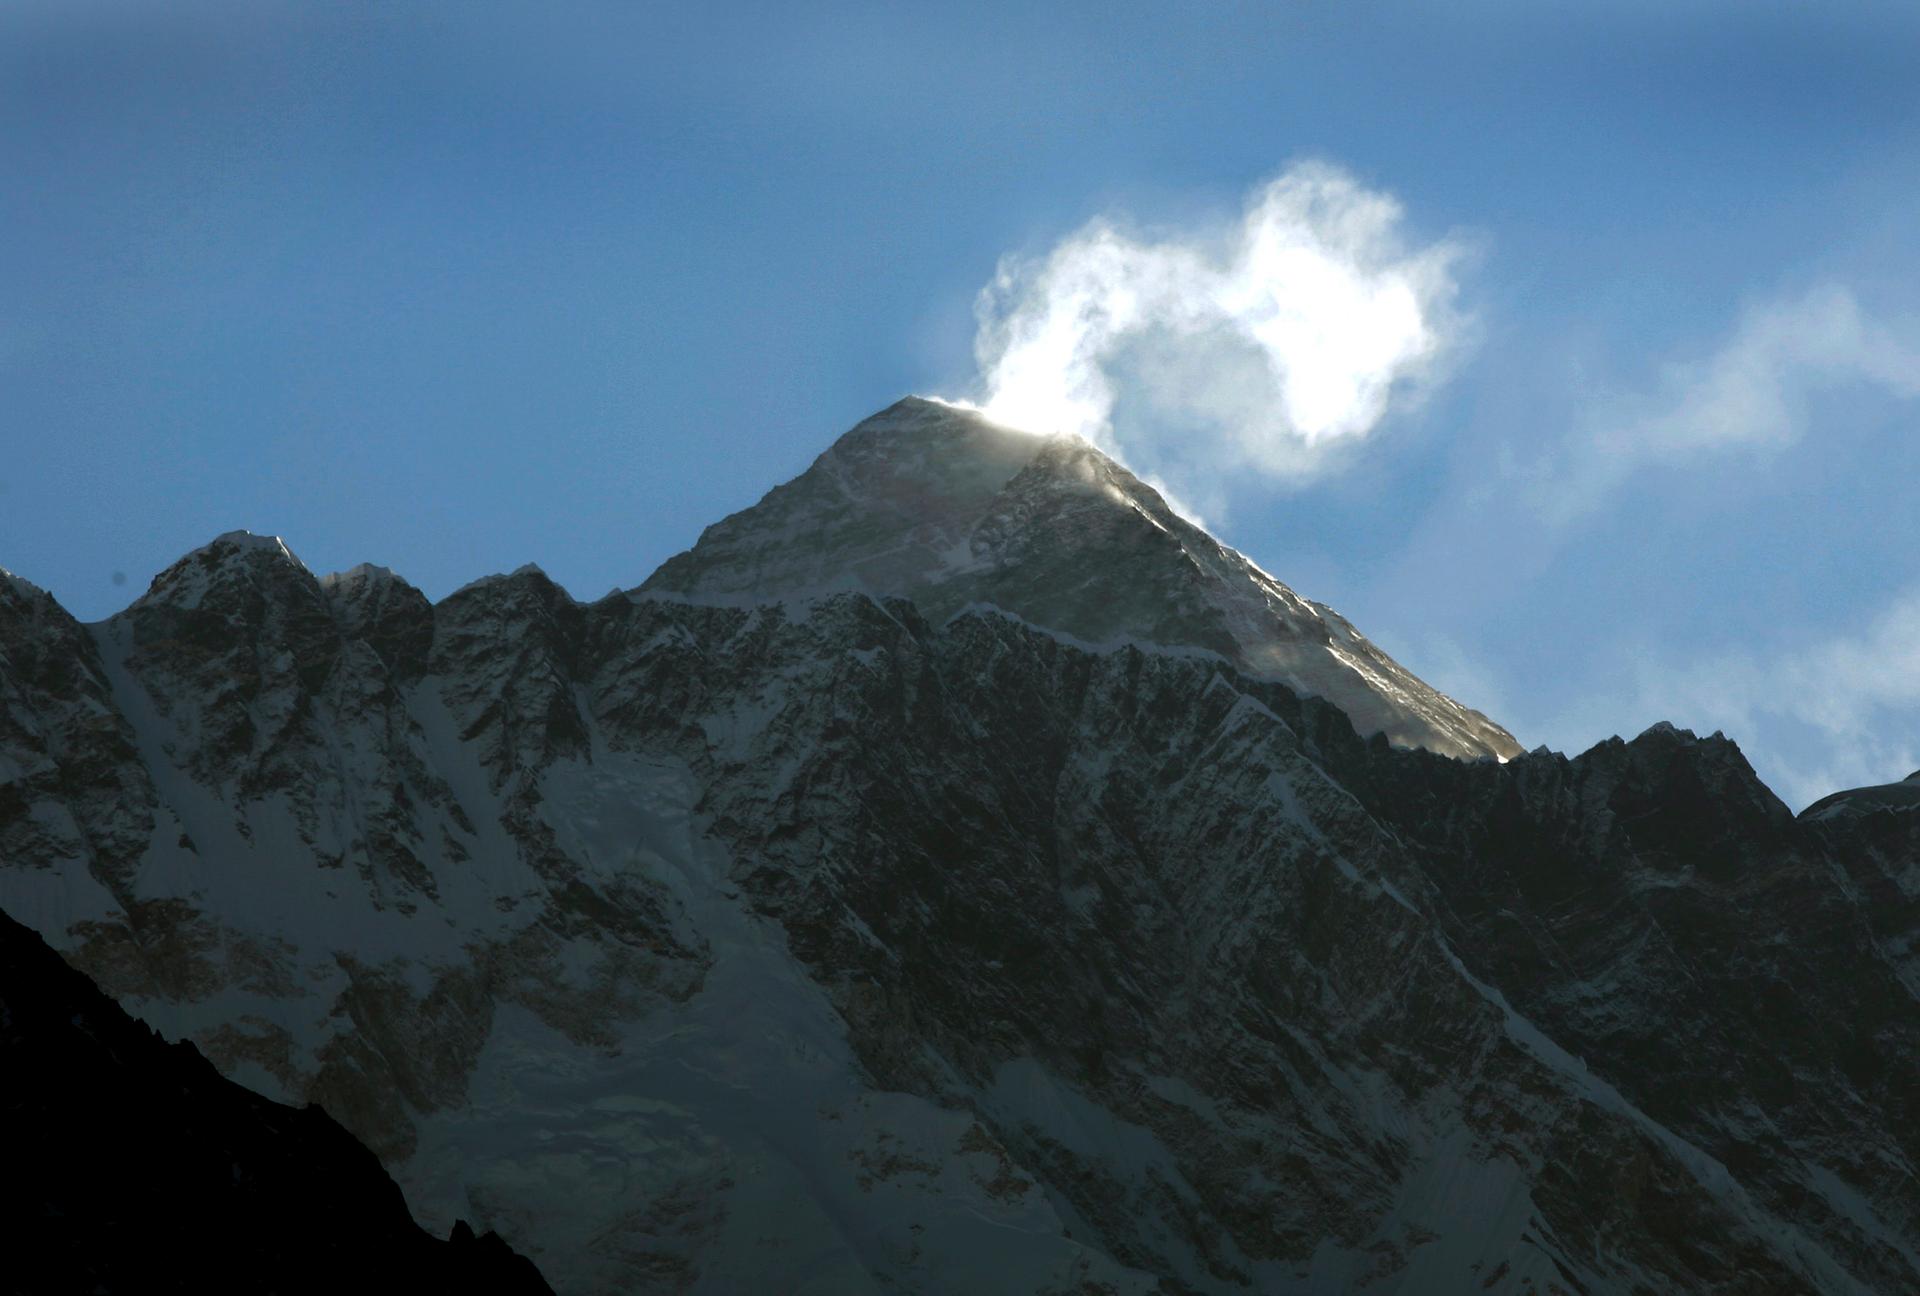 Mt. Everest, the world's highest mountain, is seen from the viewing point at Lukla in northern Nepal.